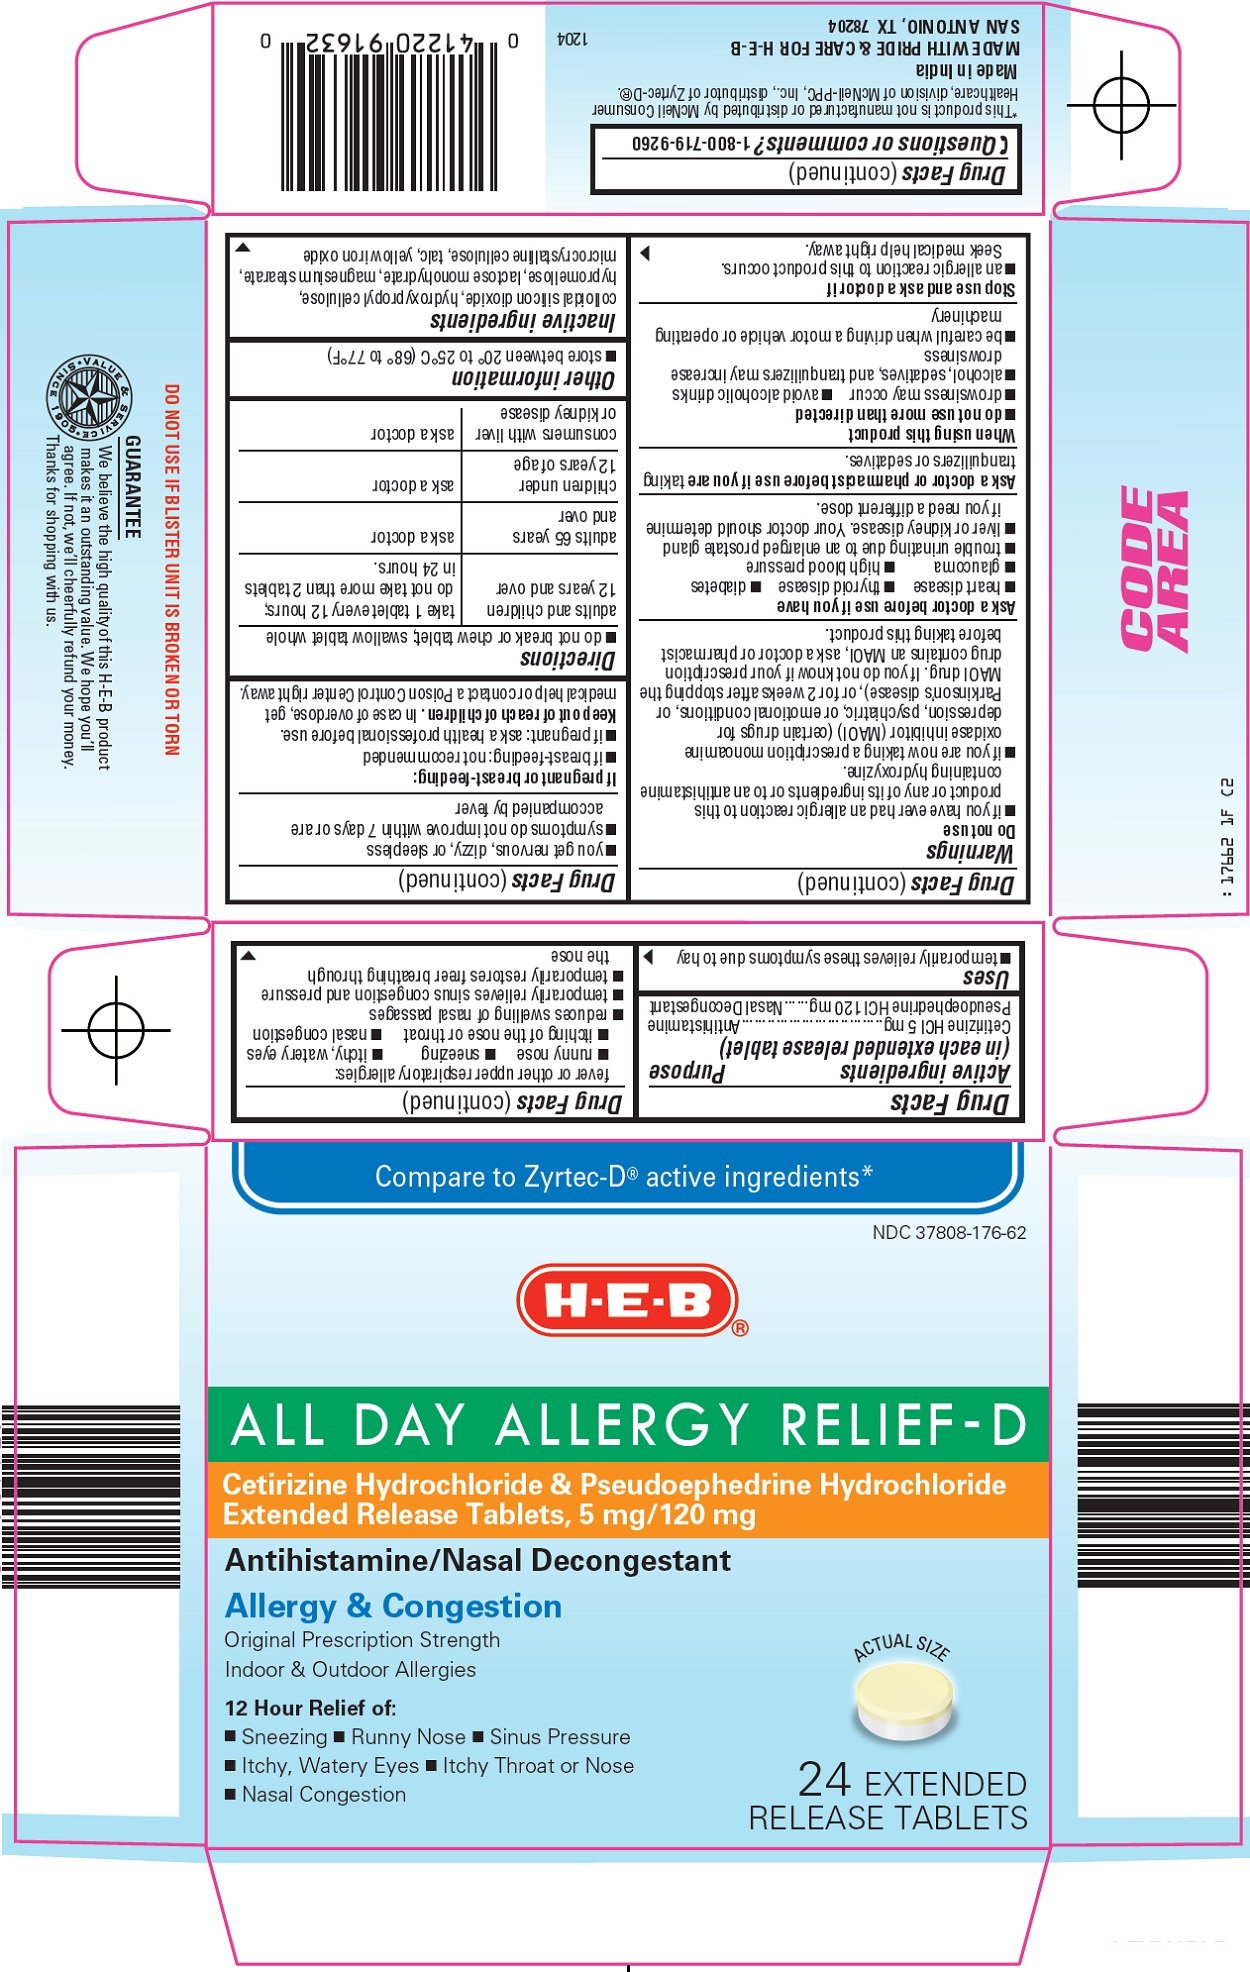 All Day Allergy Relief-D Carton Image